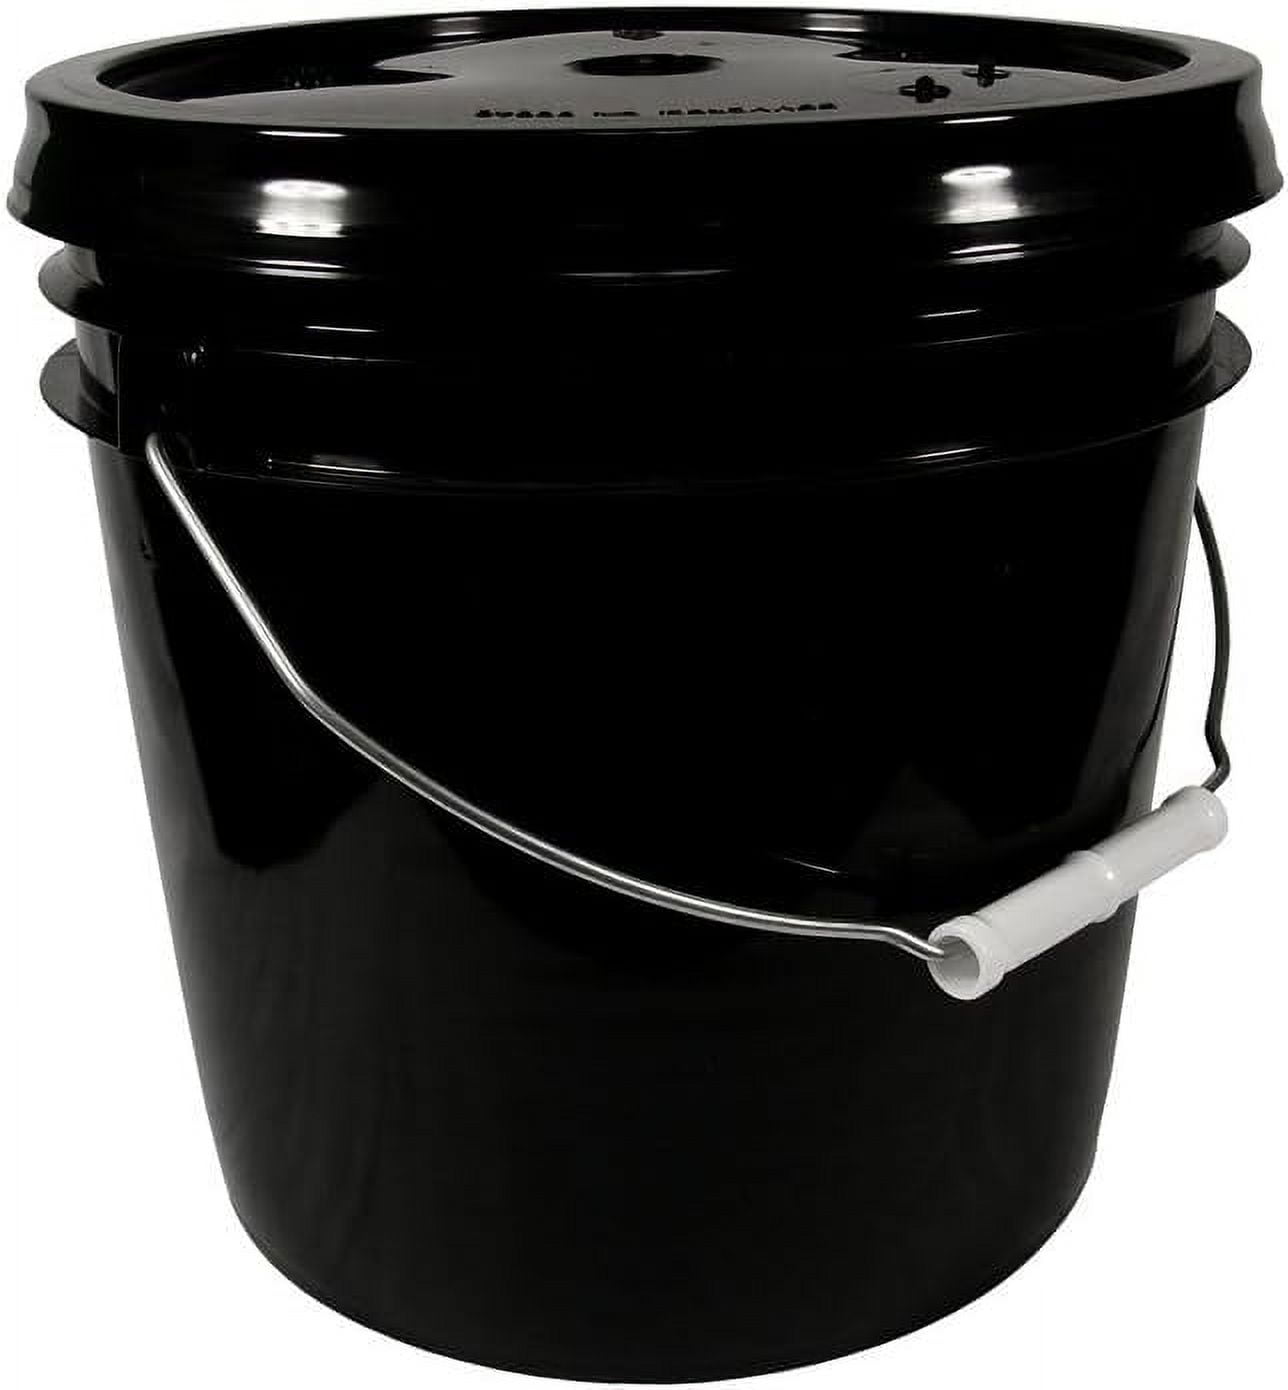 Green 5 Gallon Buckets and Spout Lids Food Grade Combo 3 Pack <Font  color=red> Special